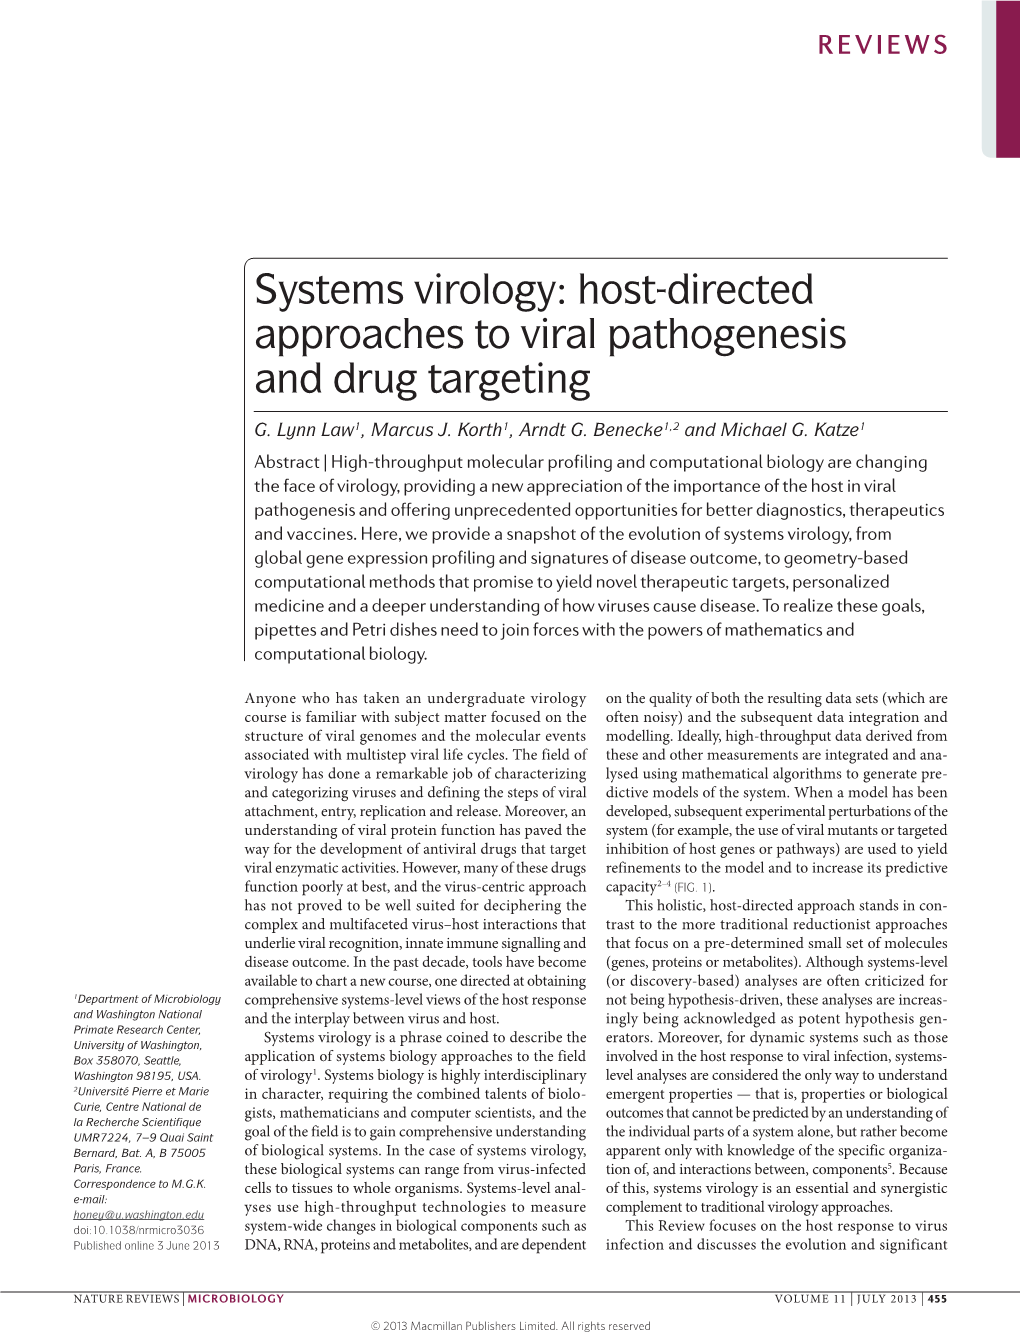 Systems Virology: Host-Directed Approaches to Viral Pathogenesis and Drug Targeting